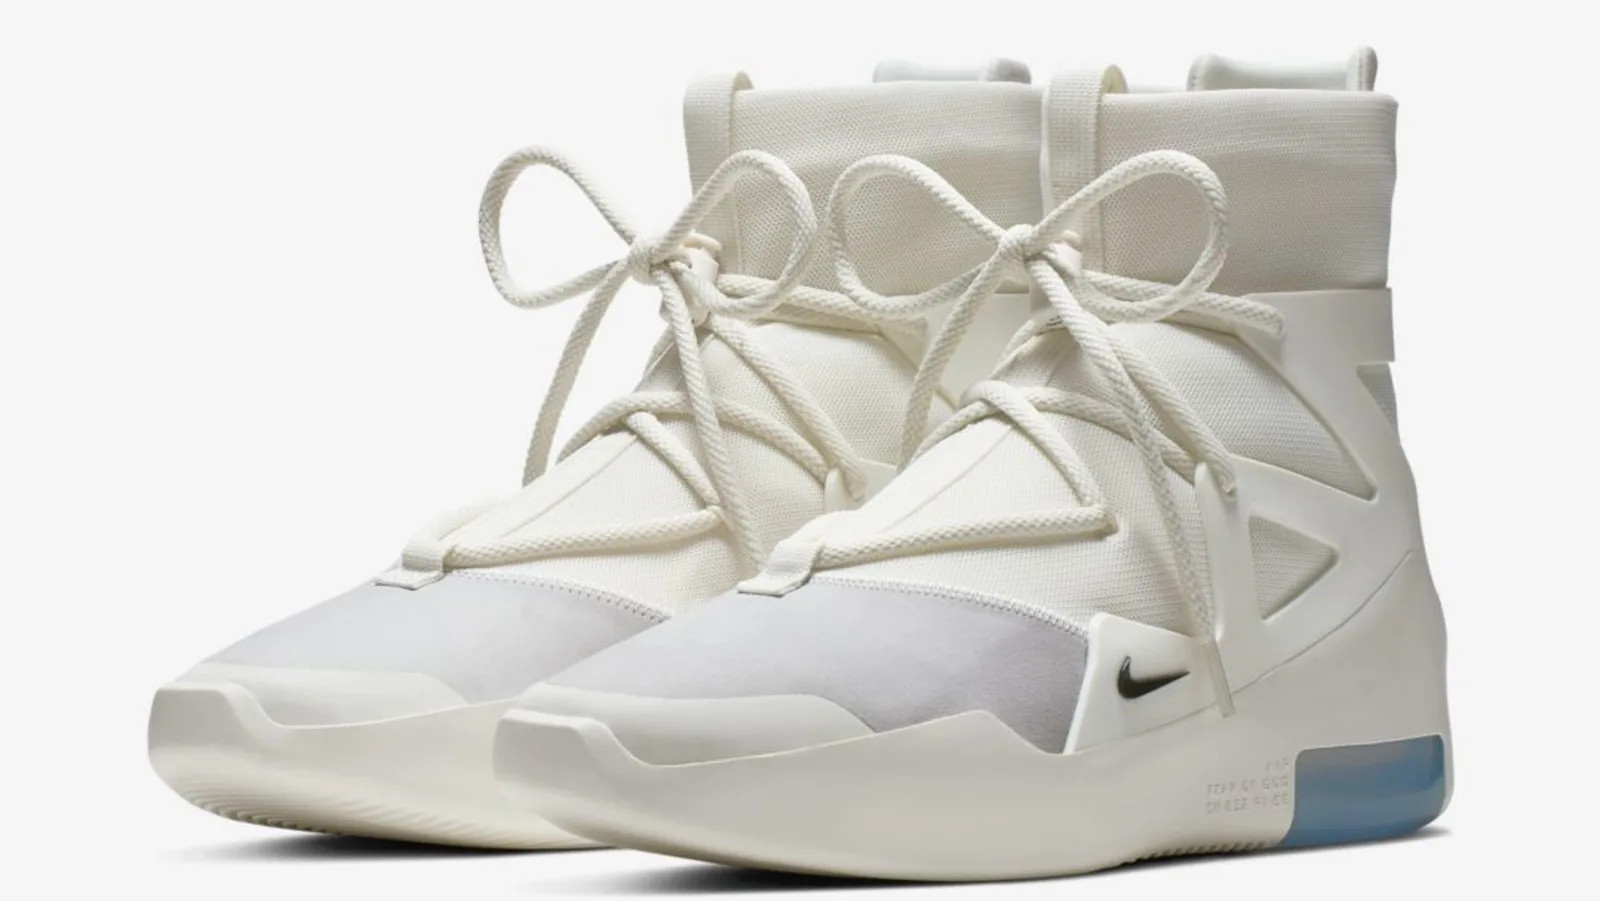 Nike Air Fear Of God 1 “Sail/Black” Release Date, Official Photos